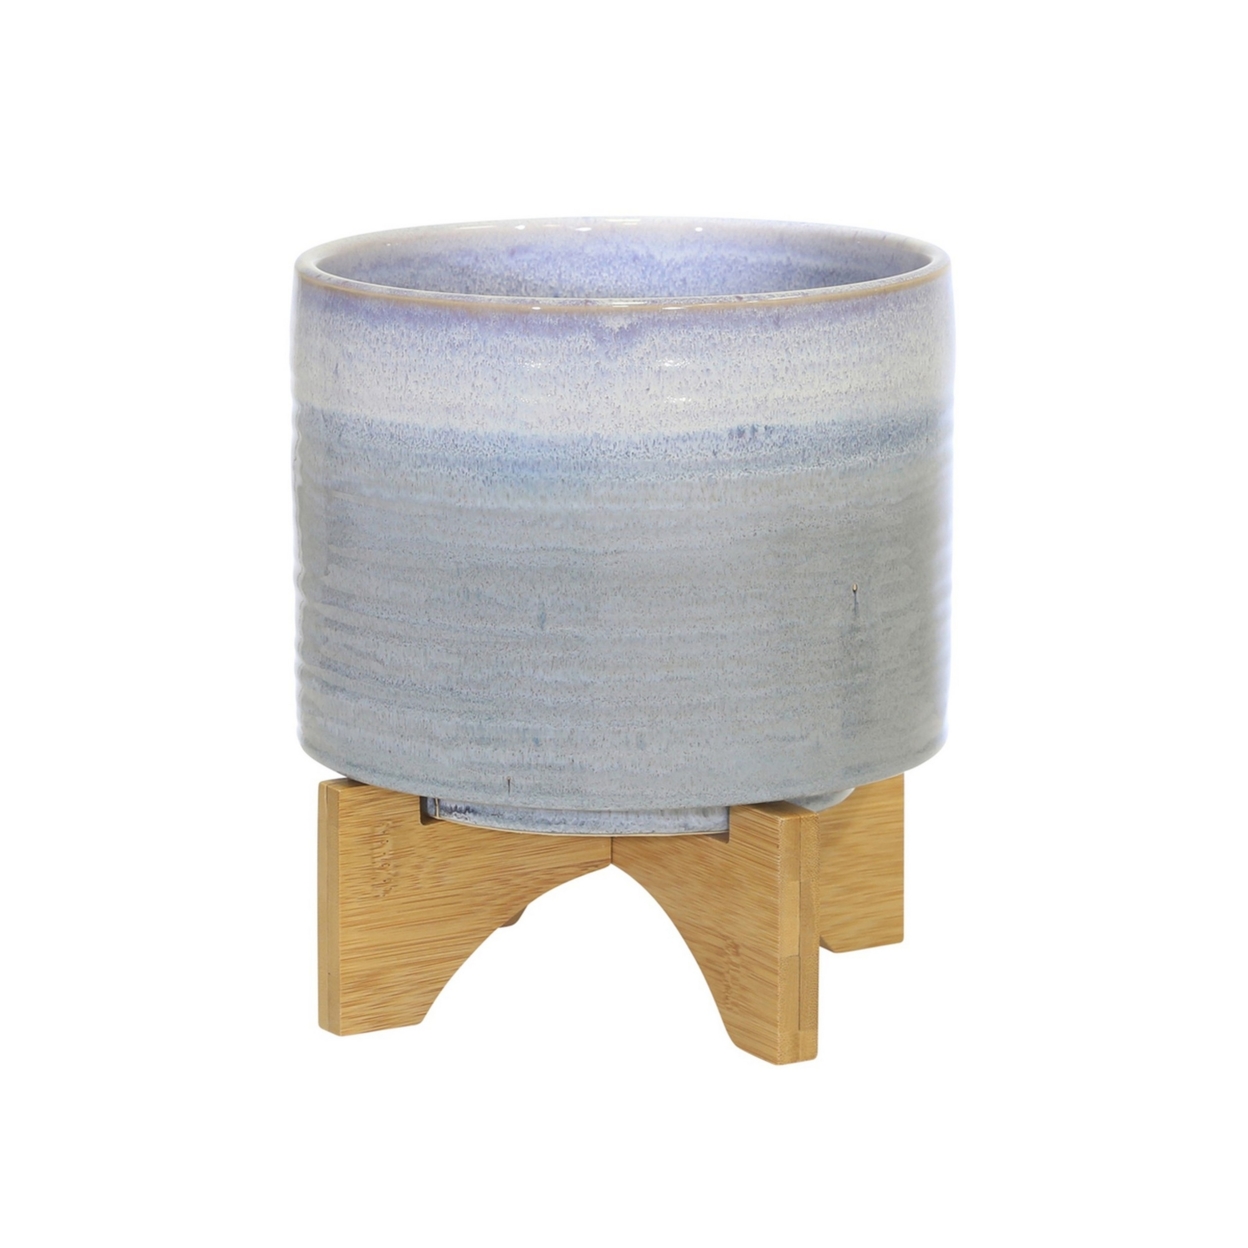 Planter With Ceramic And Wooden Stand, Blue And Brown- Saltoro Sherpi